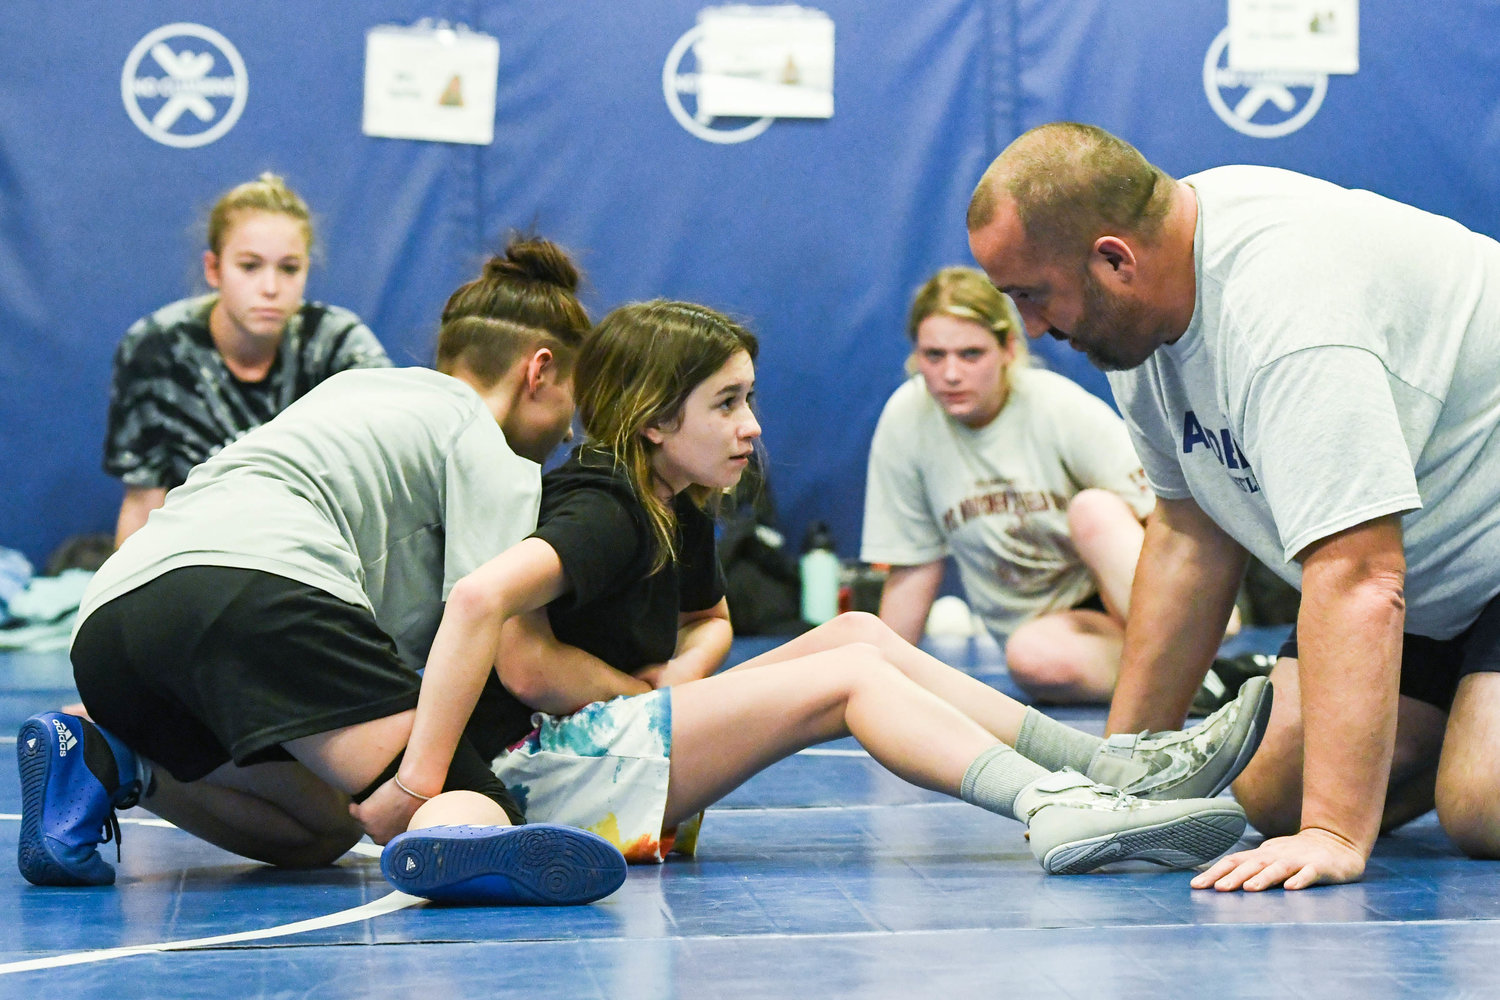 Camden head coach Jeremy Calkins helps wrestlers Hailee Evans and Madelyn Baker during practice on Monday at Camden Elementary School.